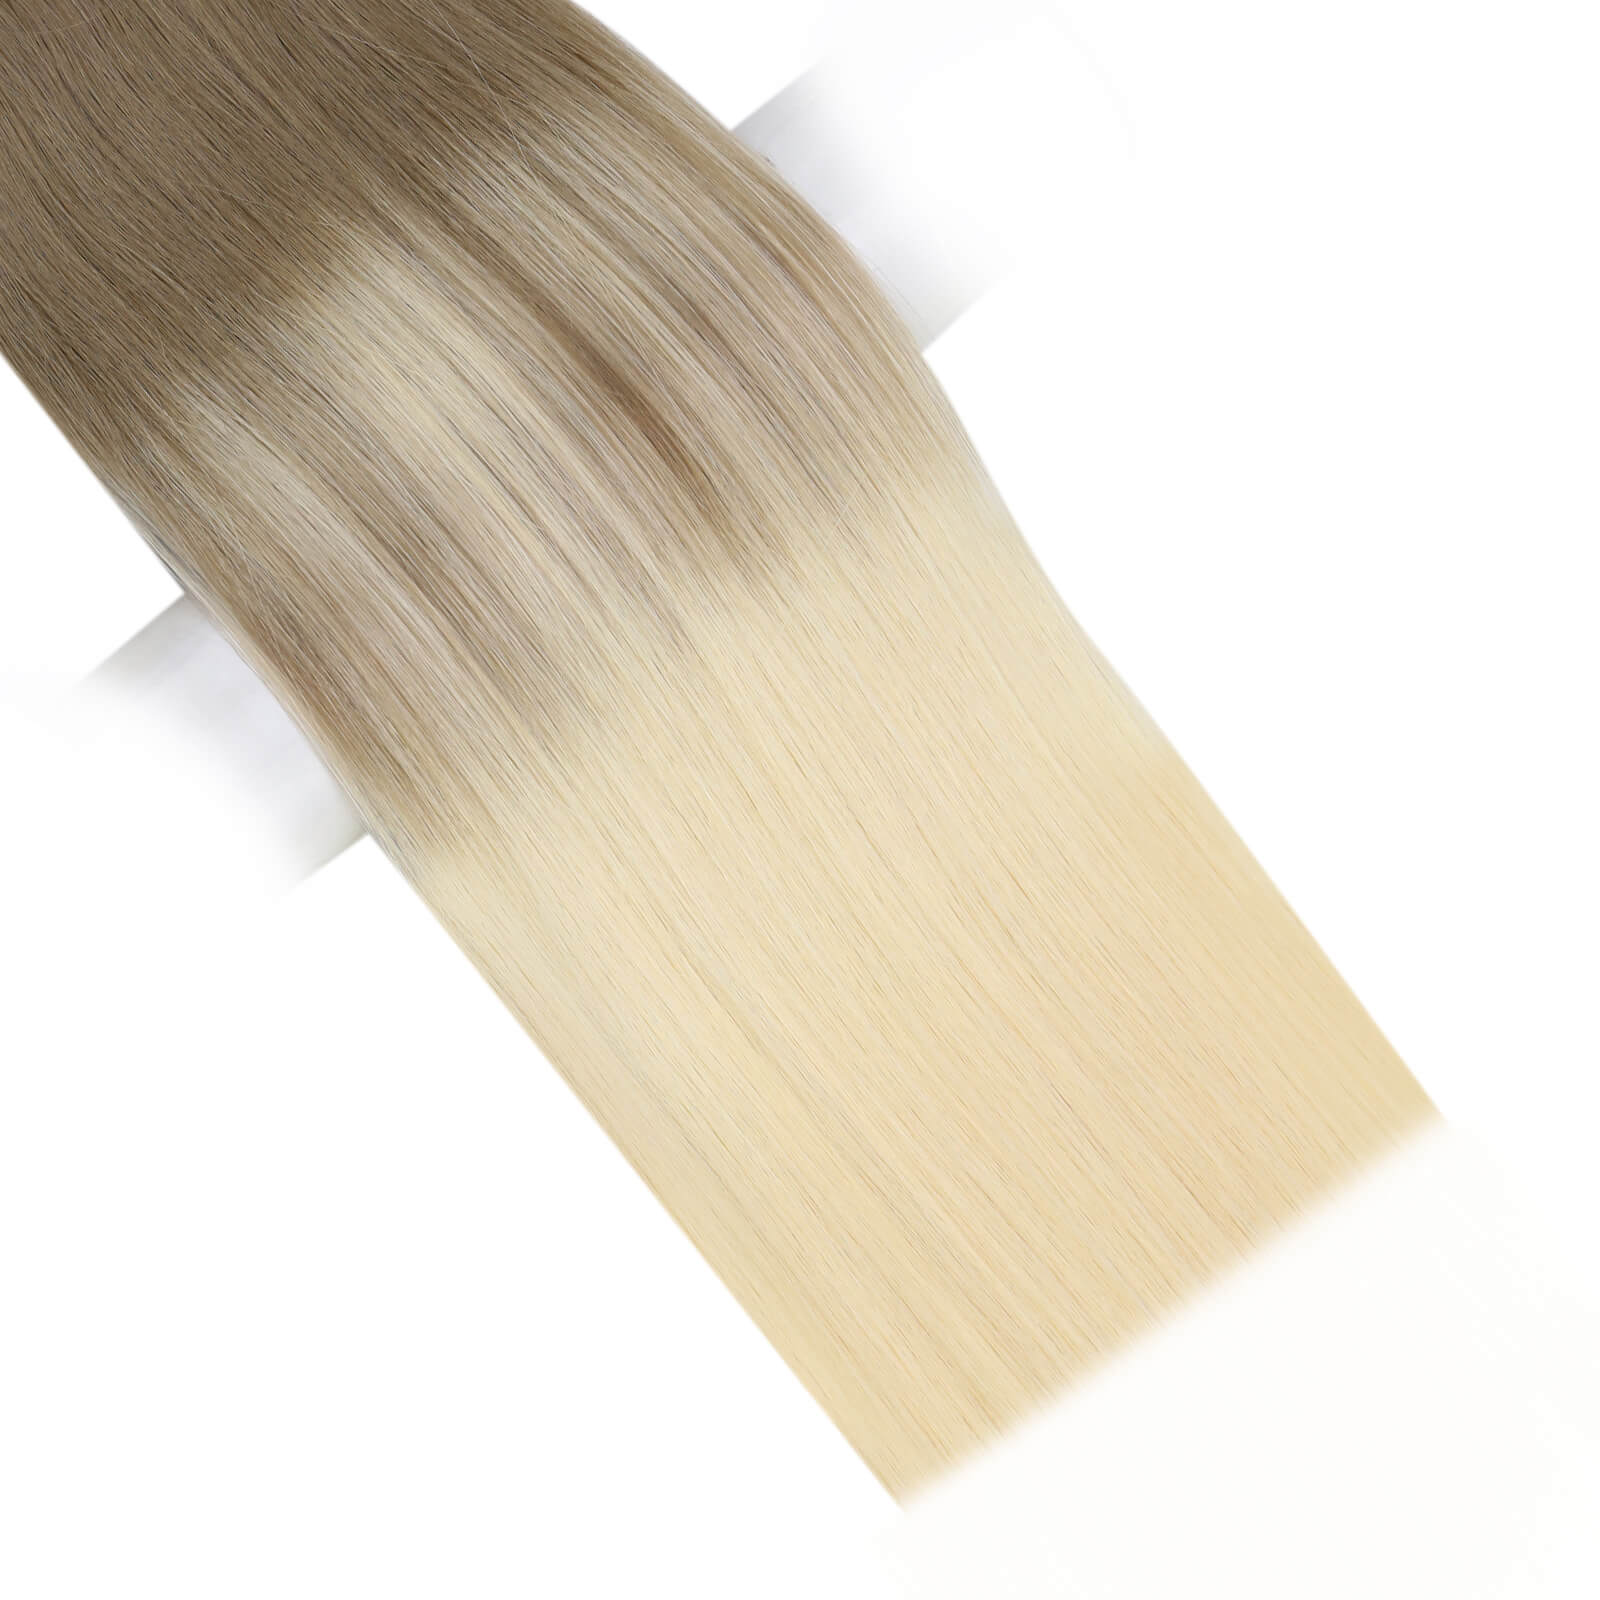 flat weft hair extensions, free cut hair weft, minimum shedding.weft hair extensions,100% real human hair 